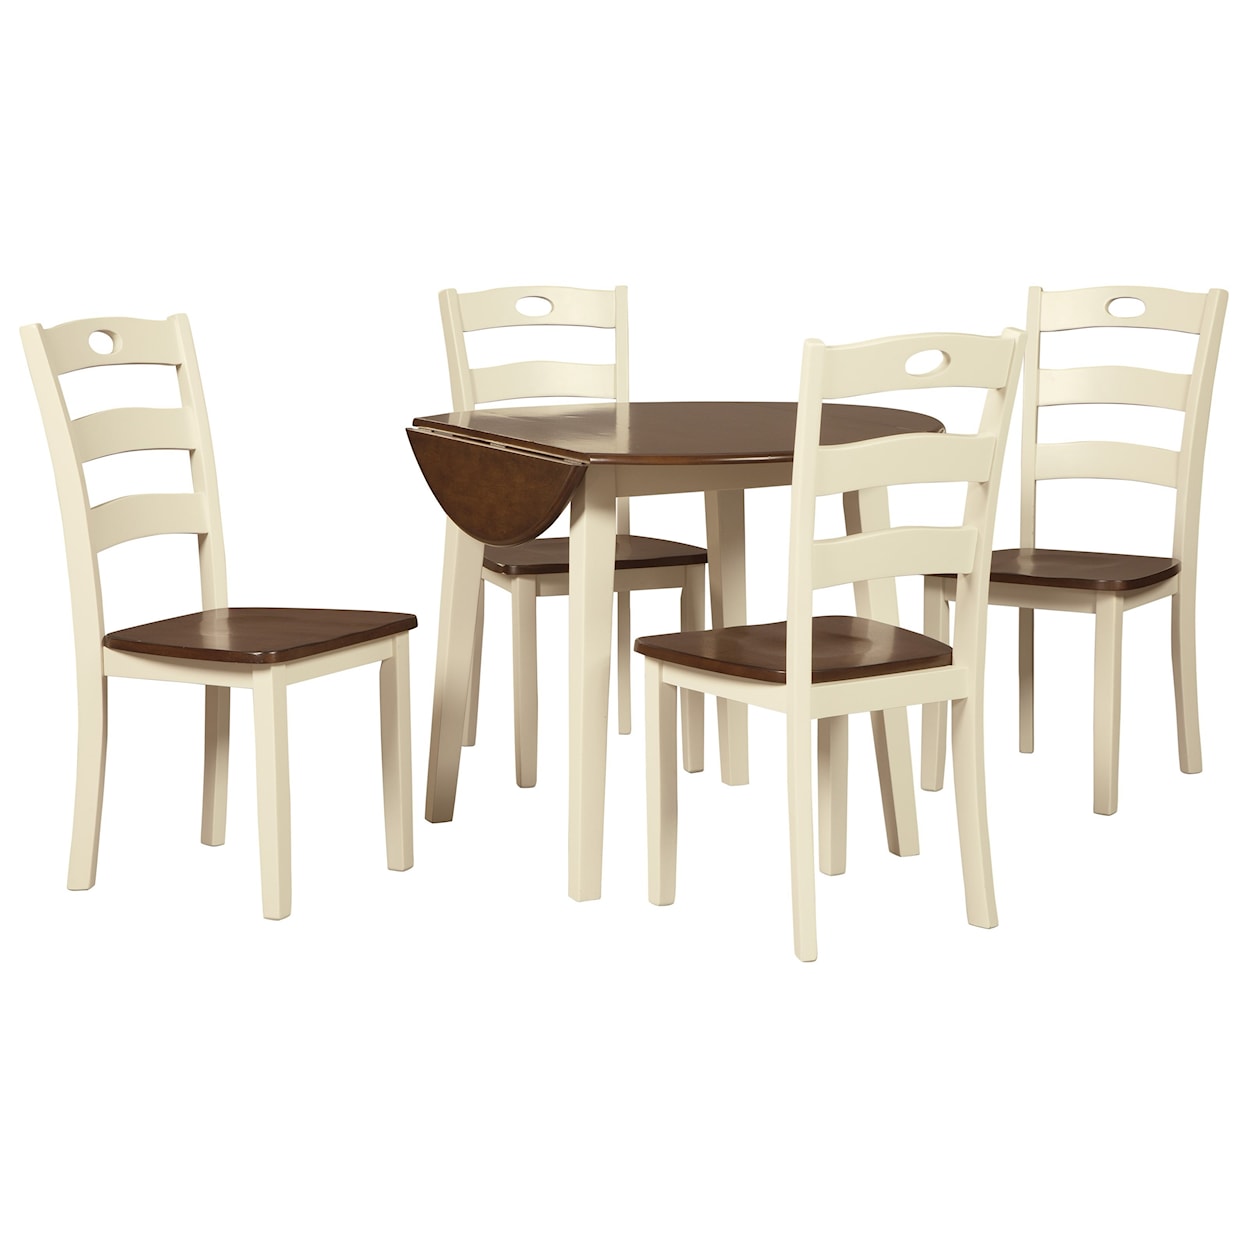 Signature Design by Ashley Woodanville 5pc Dining Room Group